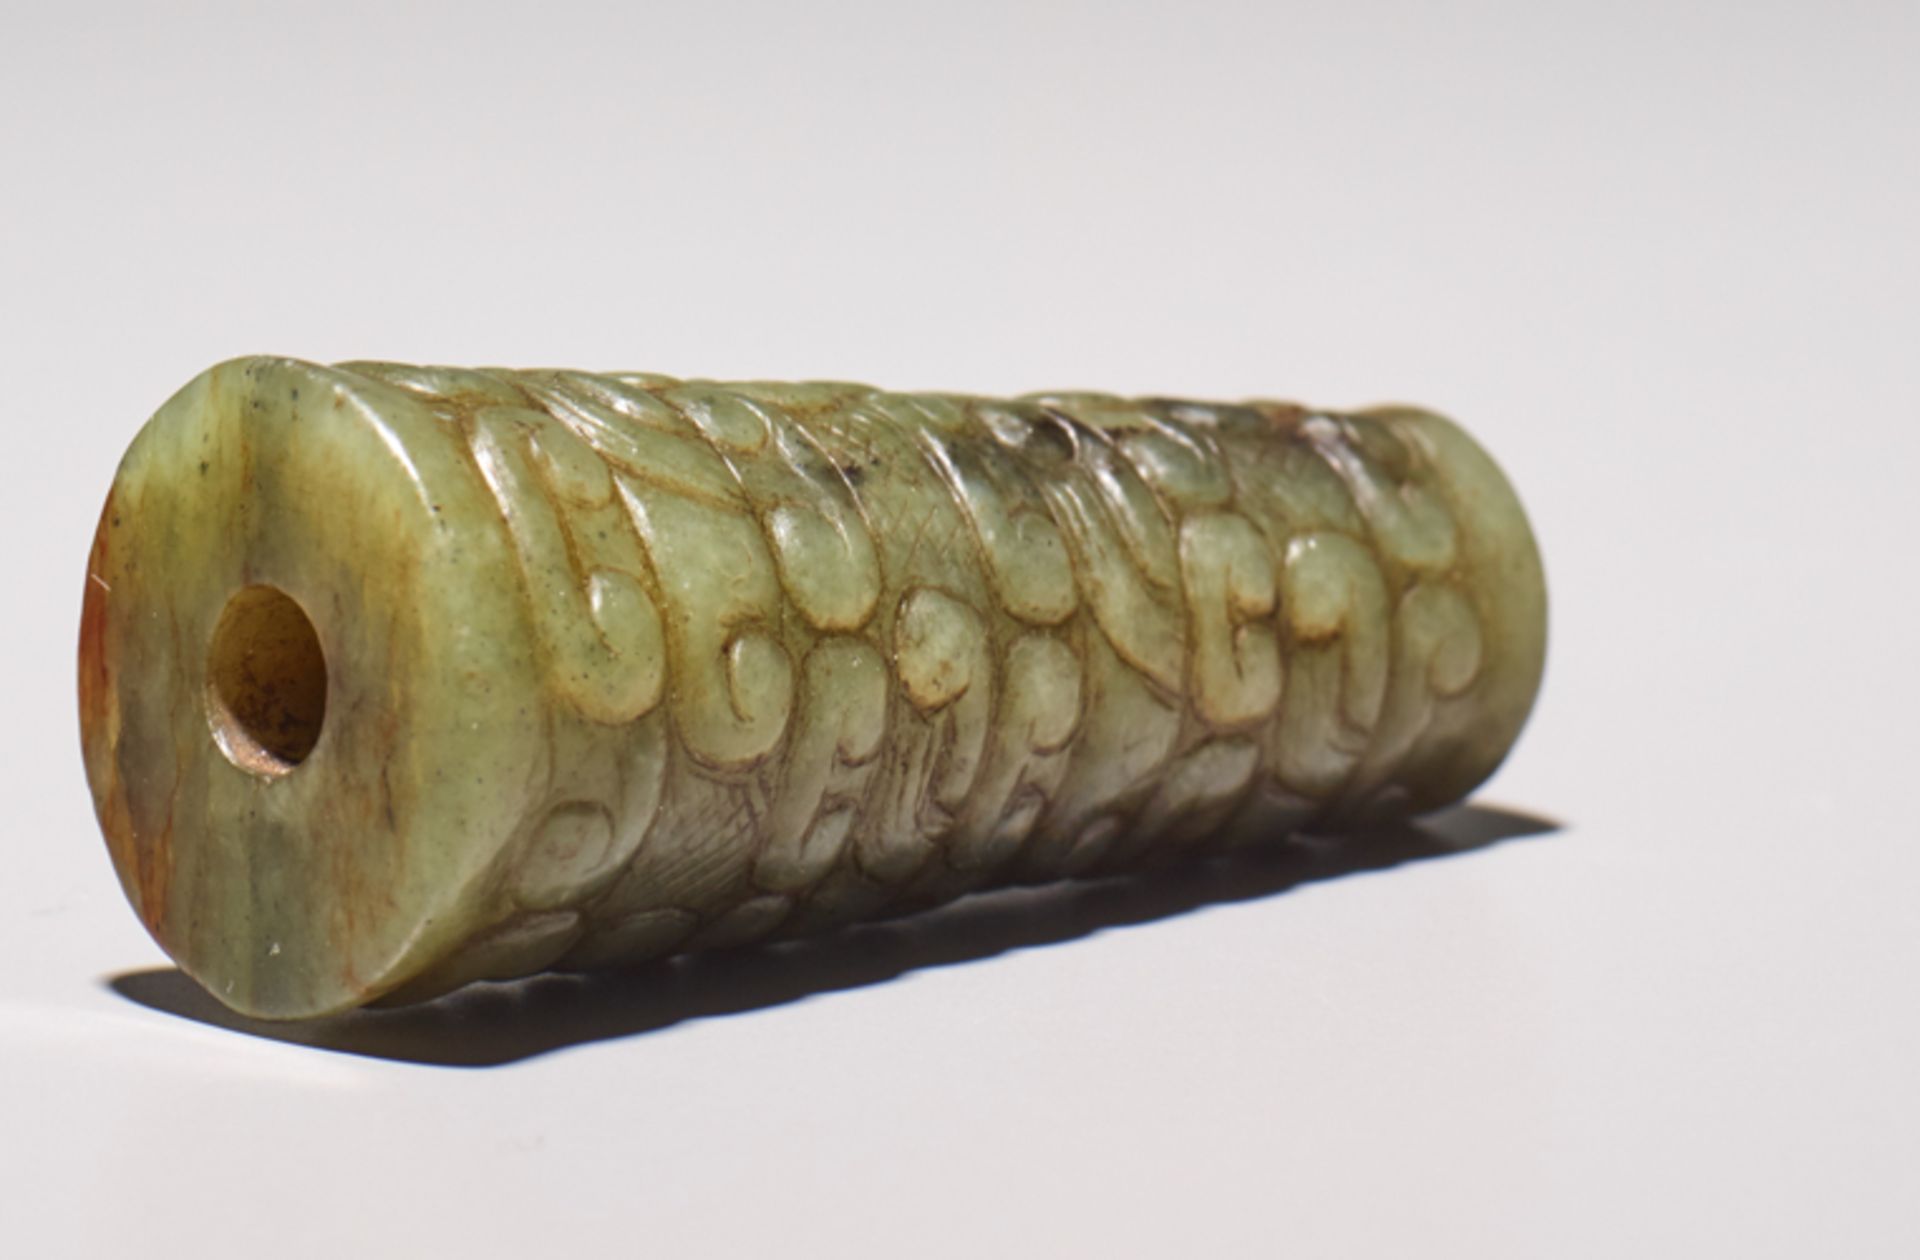 CONICAL BEADJade. China, Eastern Zhou, 5th century BCDuring the Eastern Zhou period, beads like this - Image 6 of 6